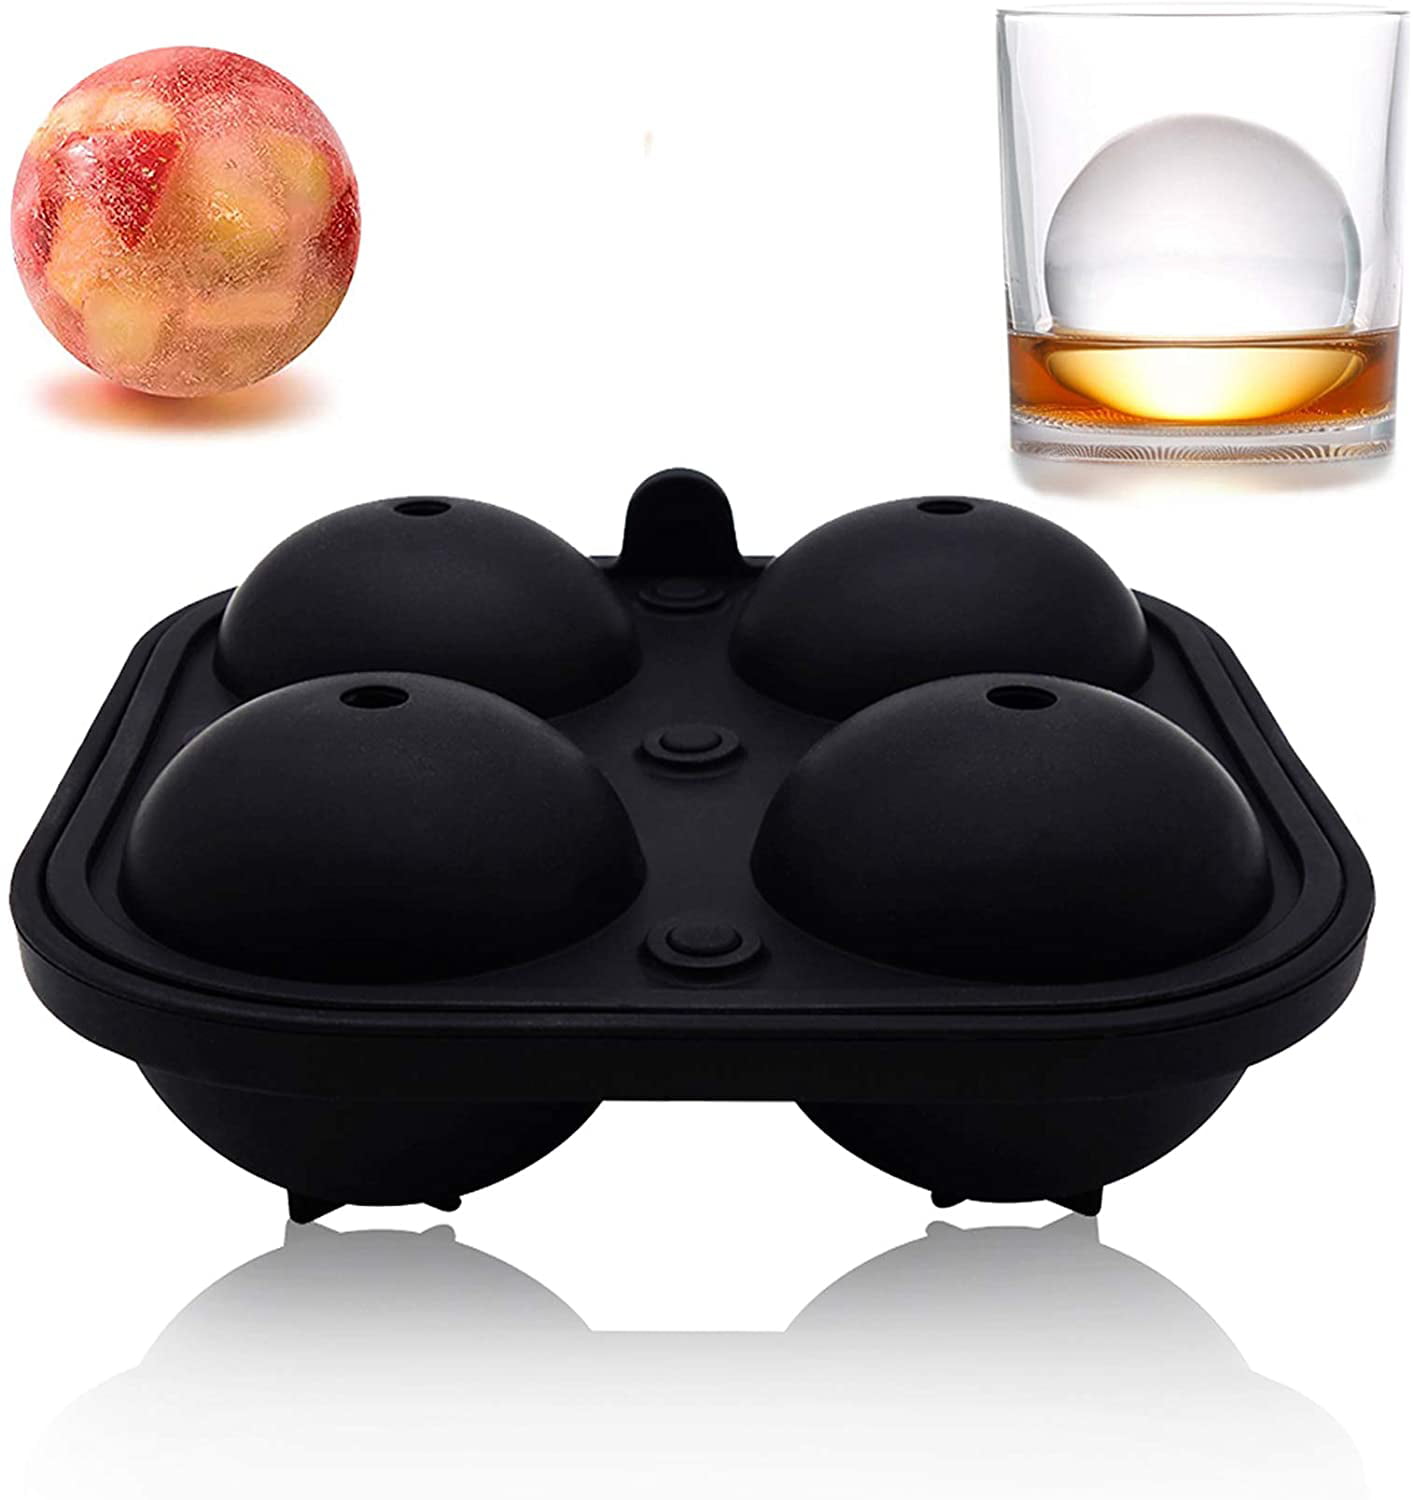 5x ICE Balls Maker Round Sphere Tray Mold Cube Whiskey Ball Cocktails Silicone 